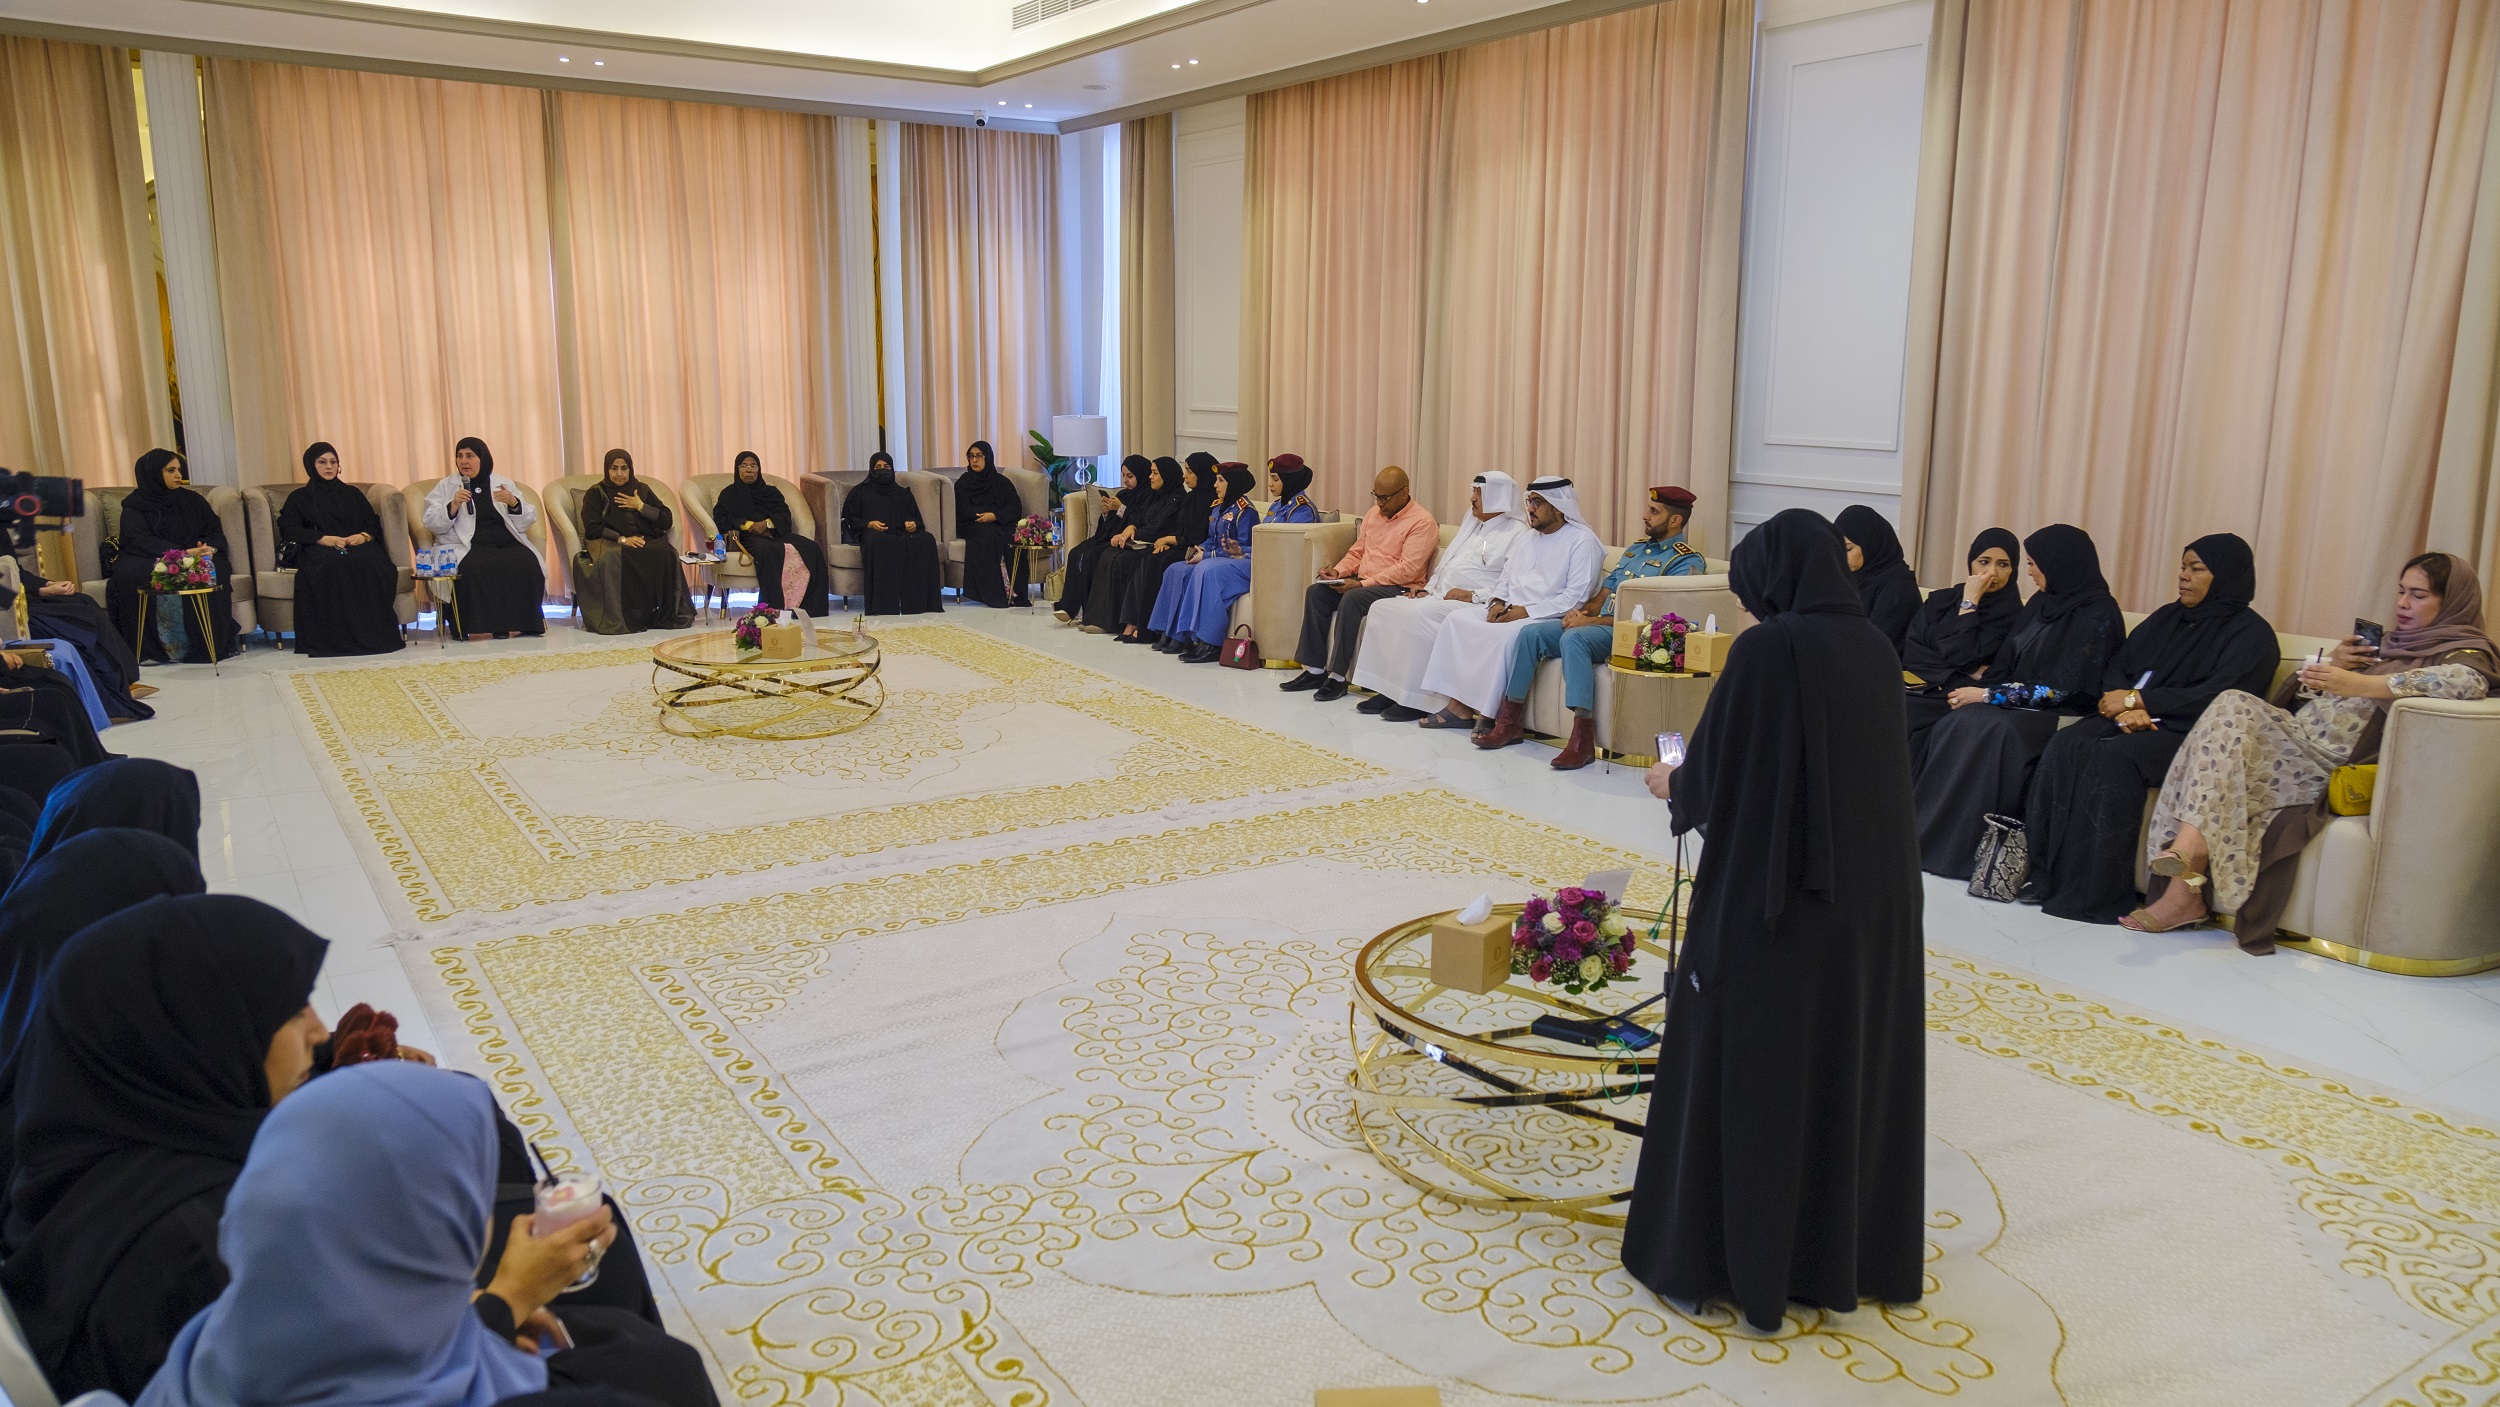 AJBWC organizes a discussion session entitled "The Economic Role of the Family"